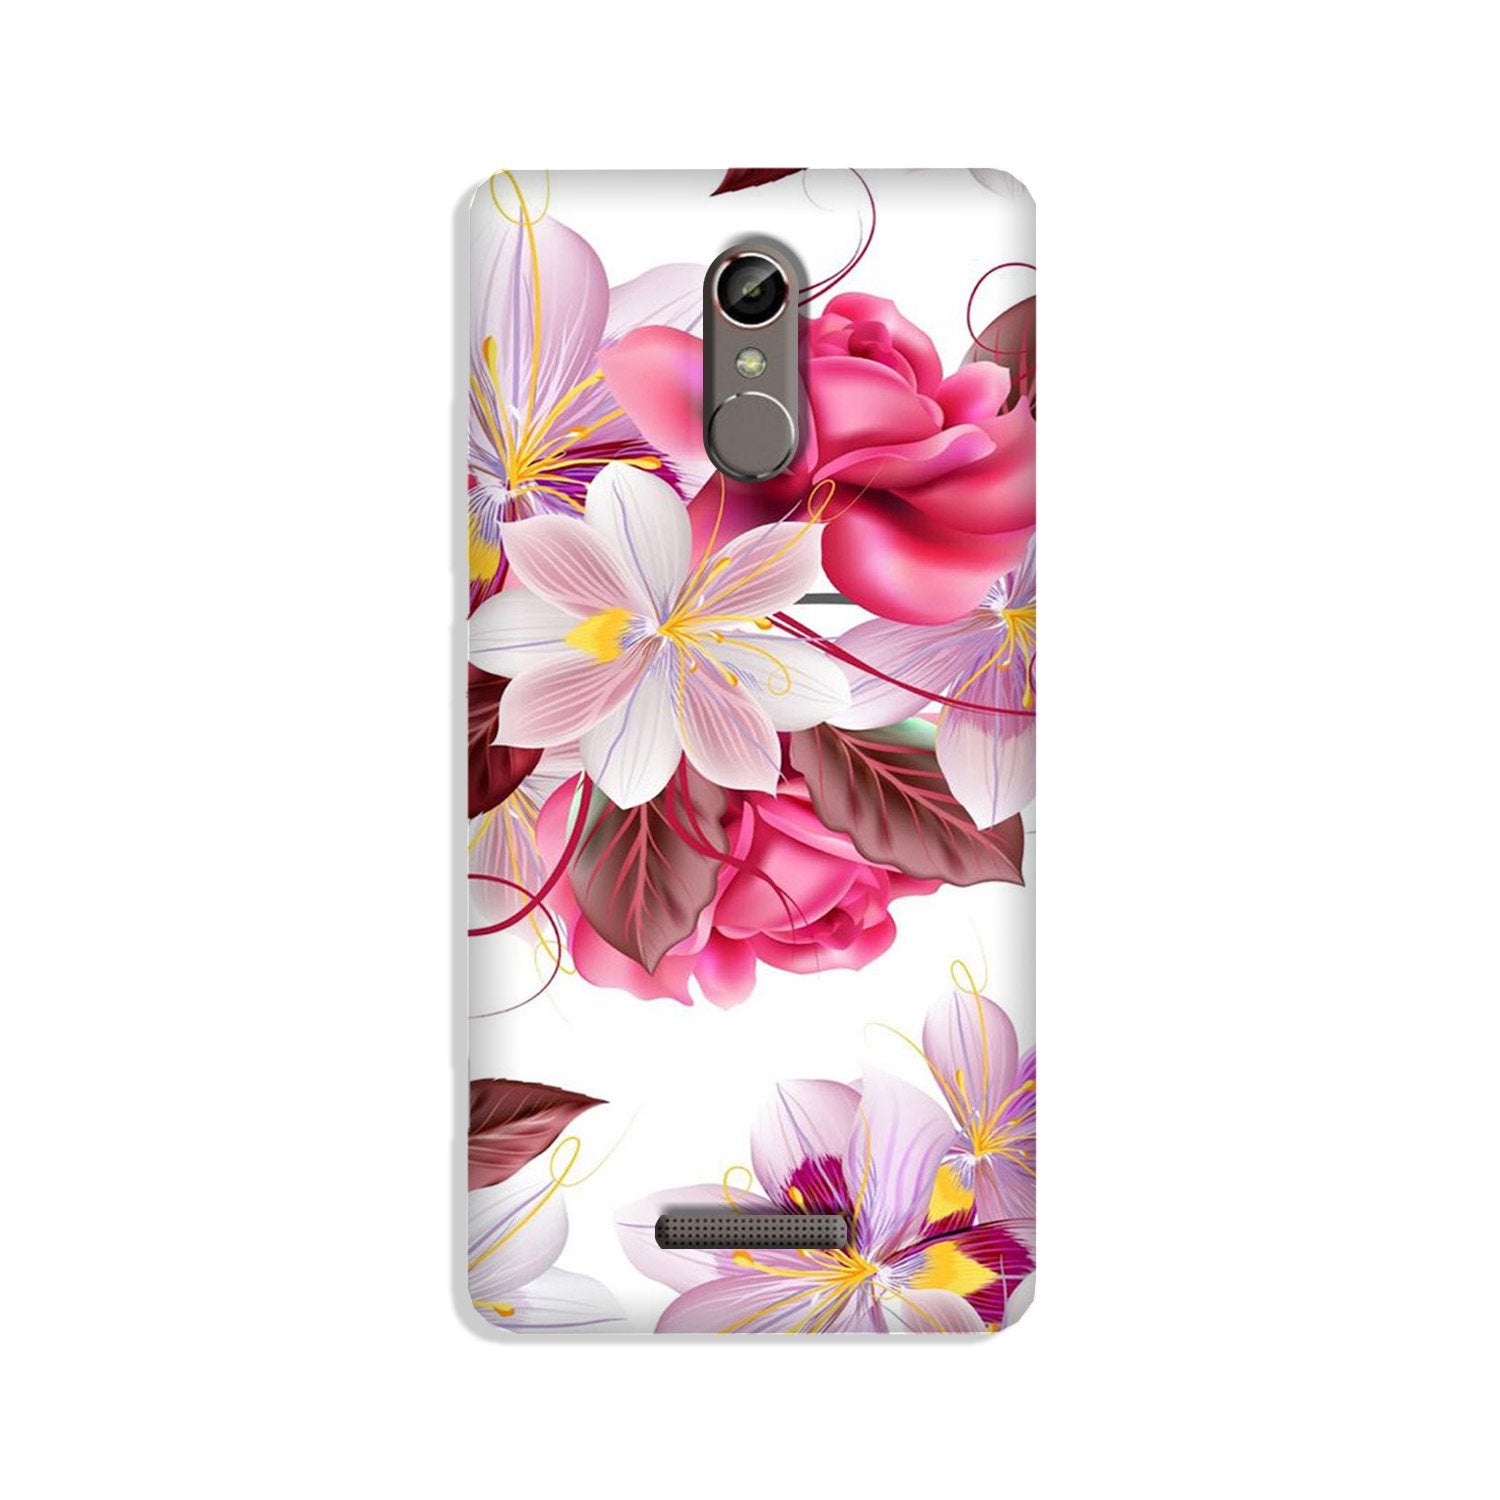 Beautiful flowers Case for Gionee S6s